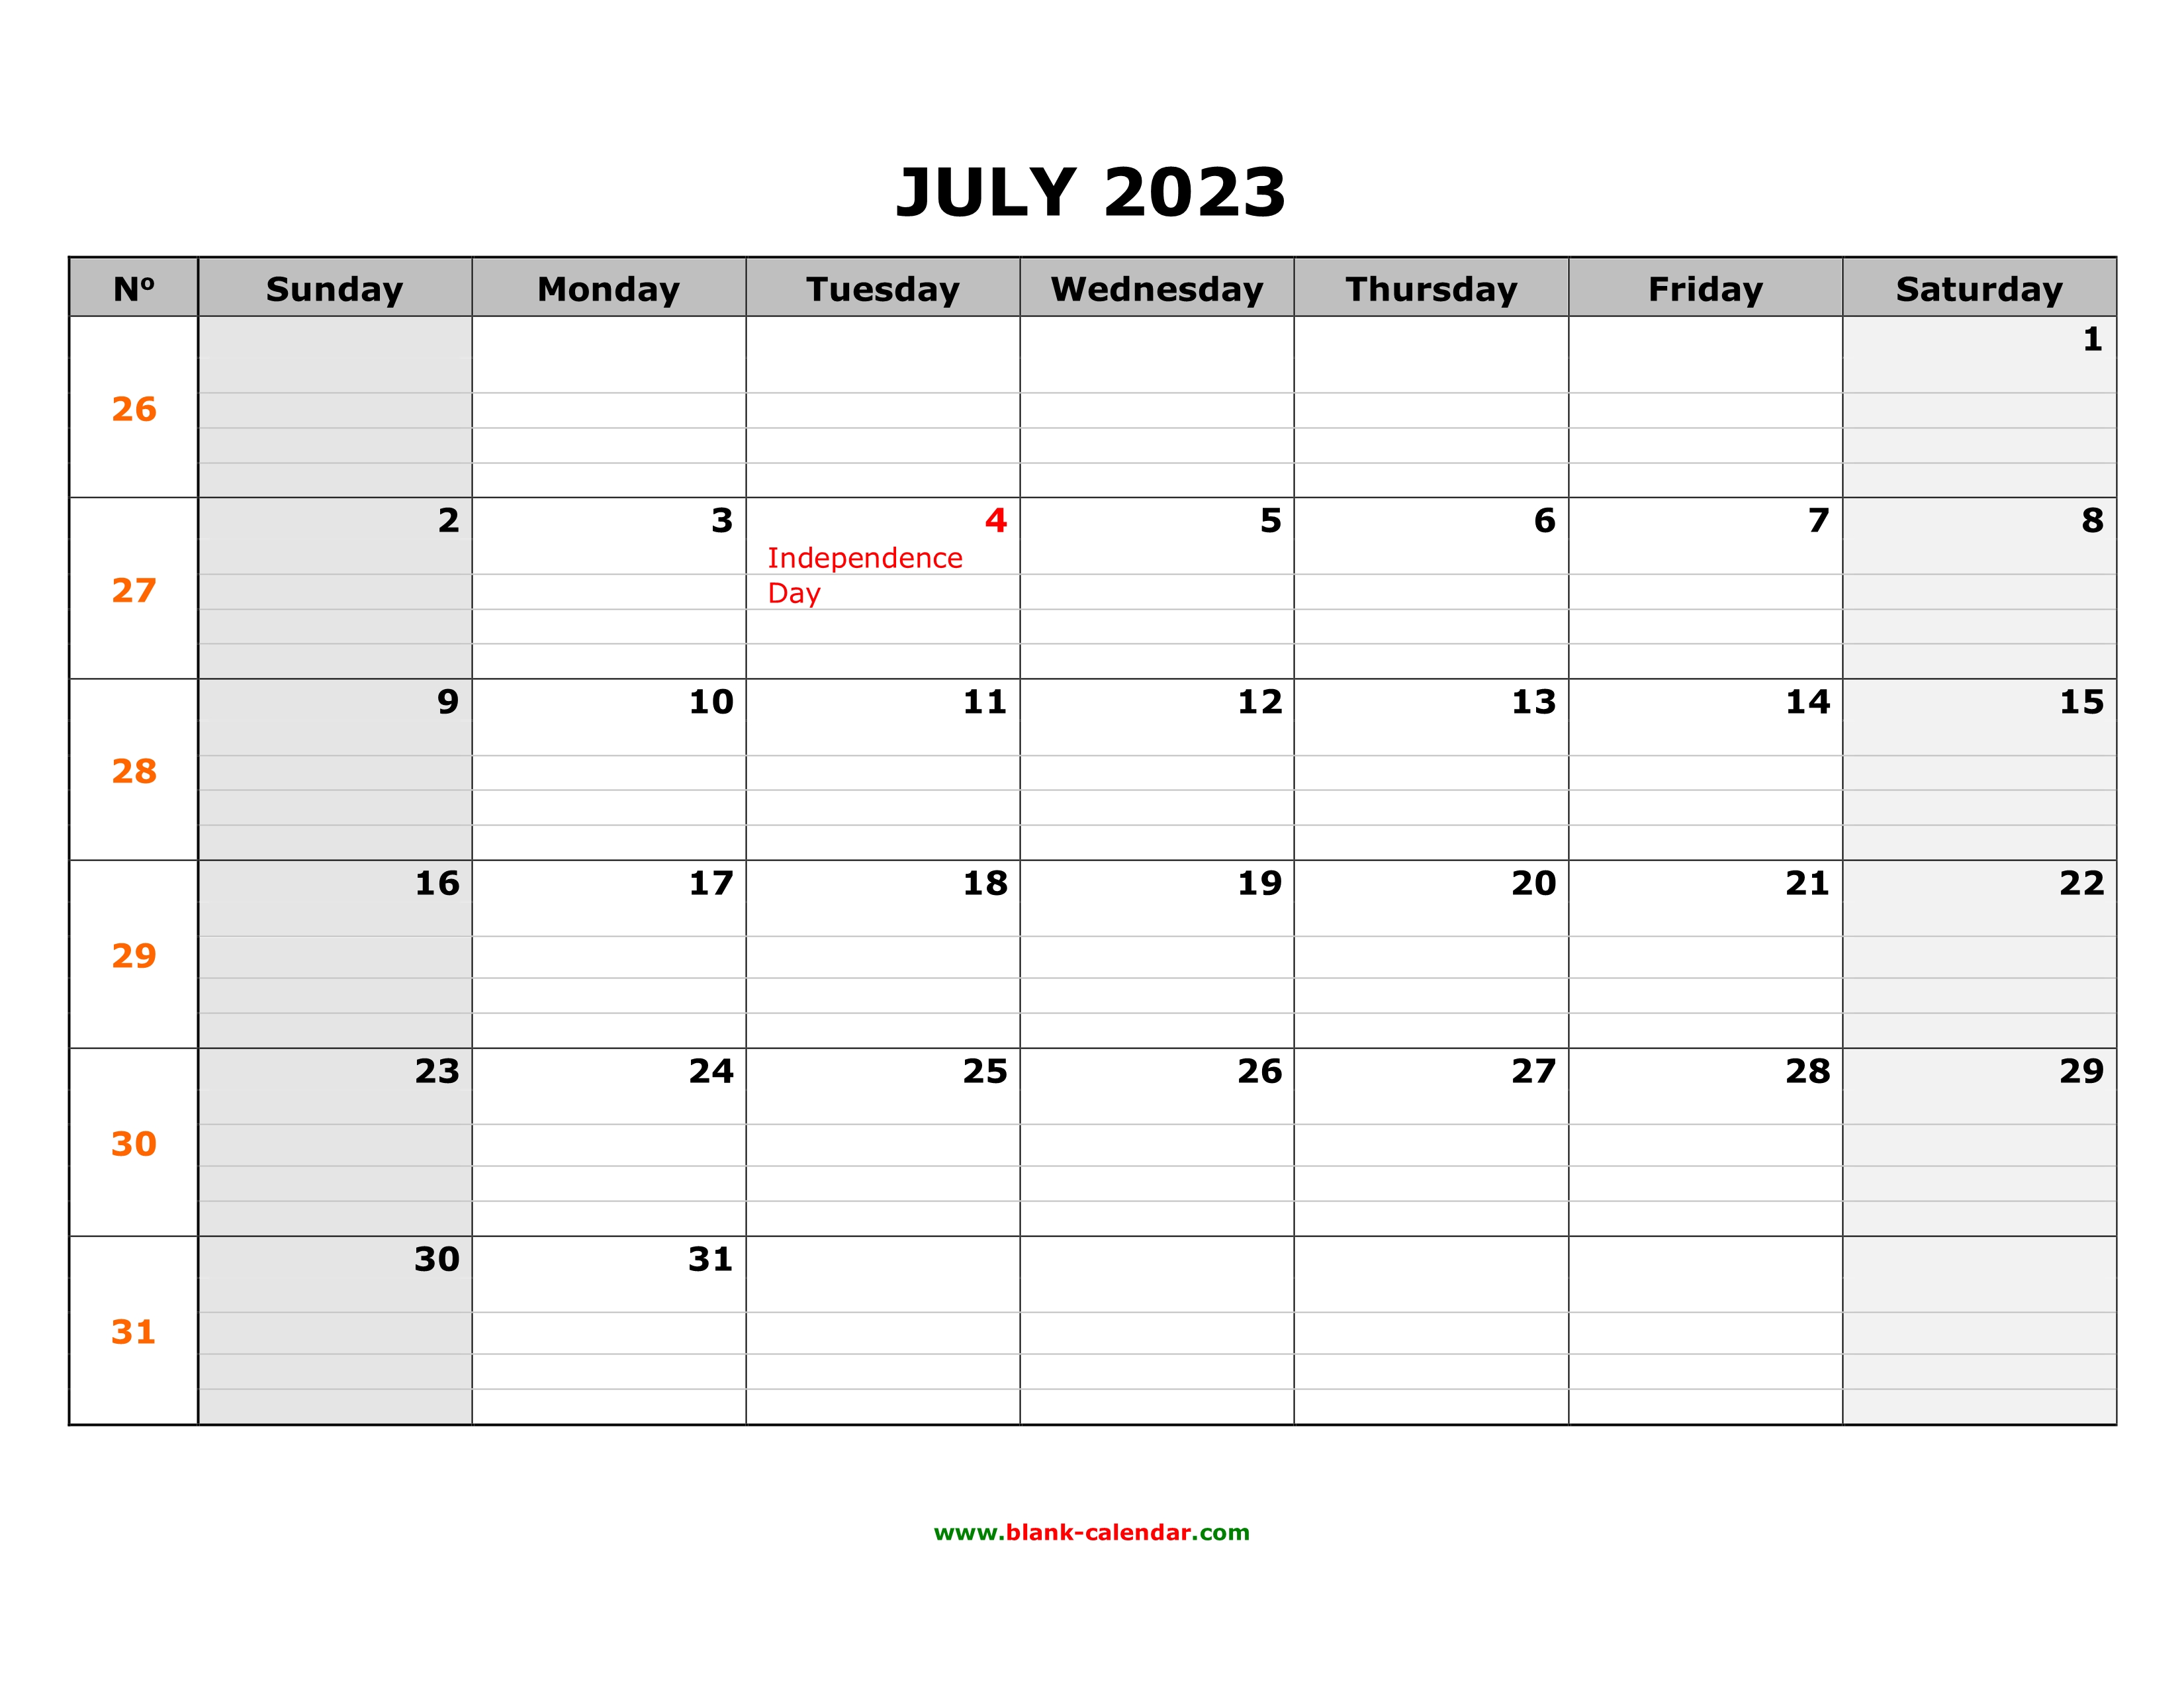 Free Download Printable July 2023 Calendar Large Box Grid Space For Notes